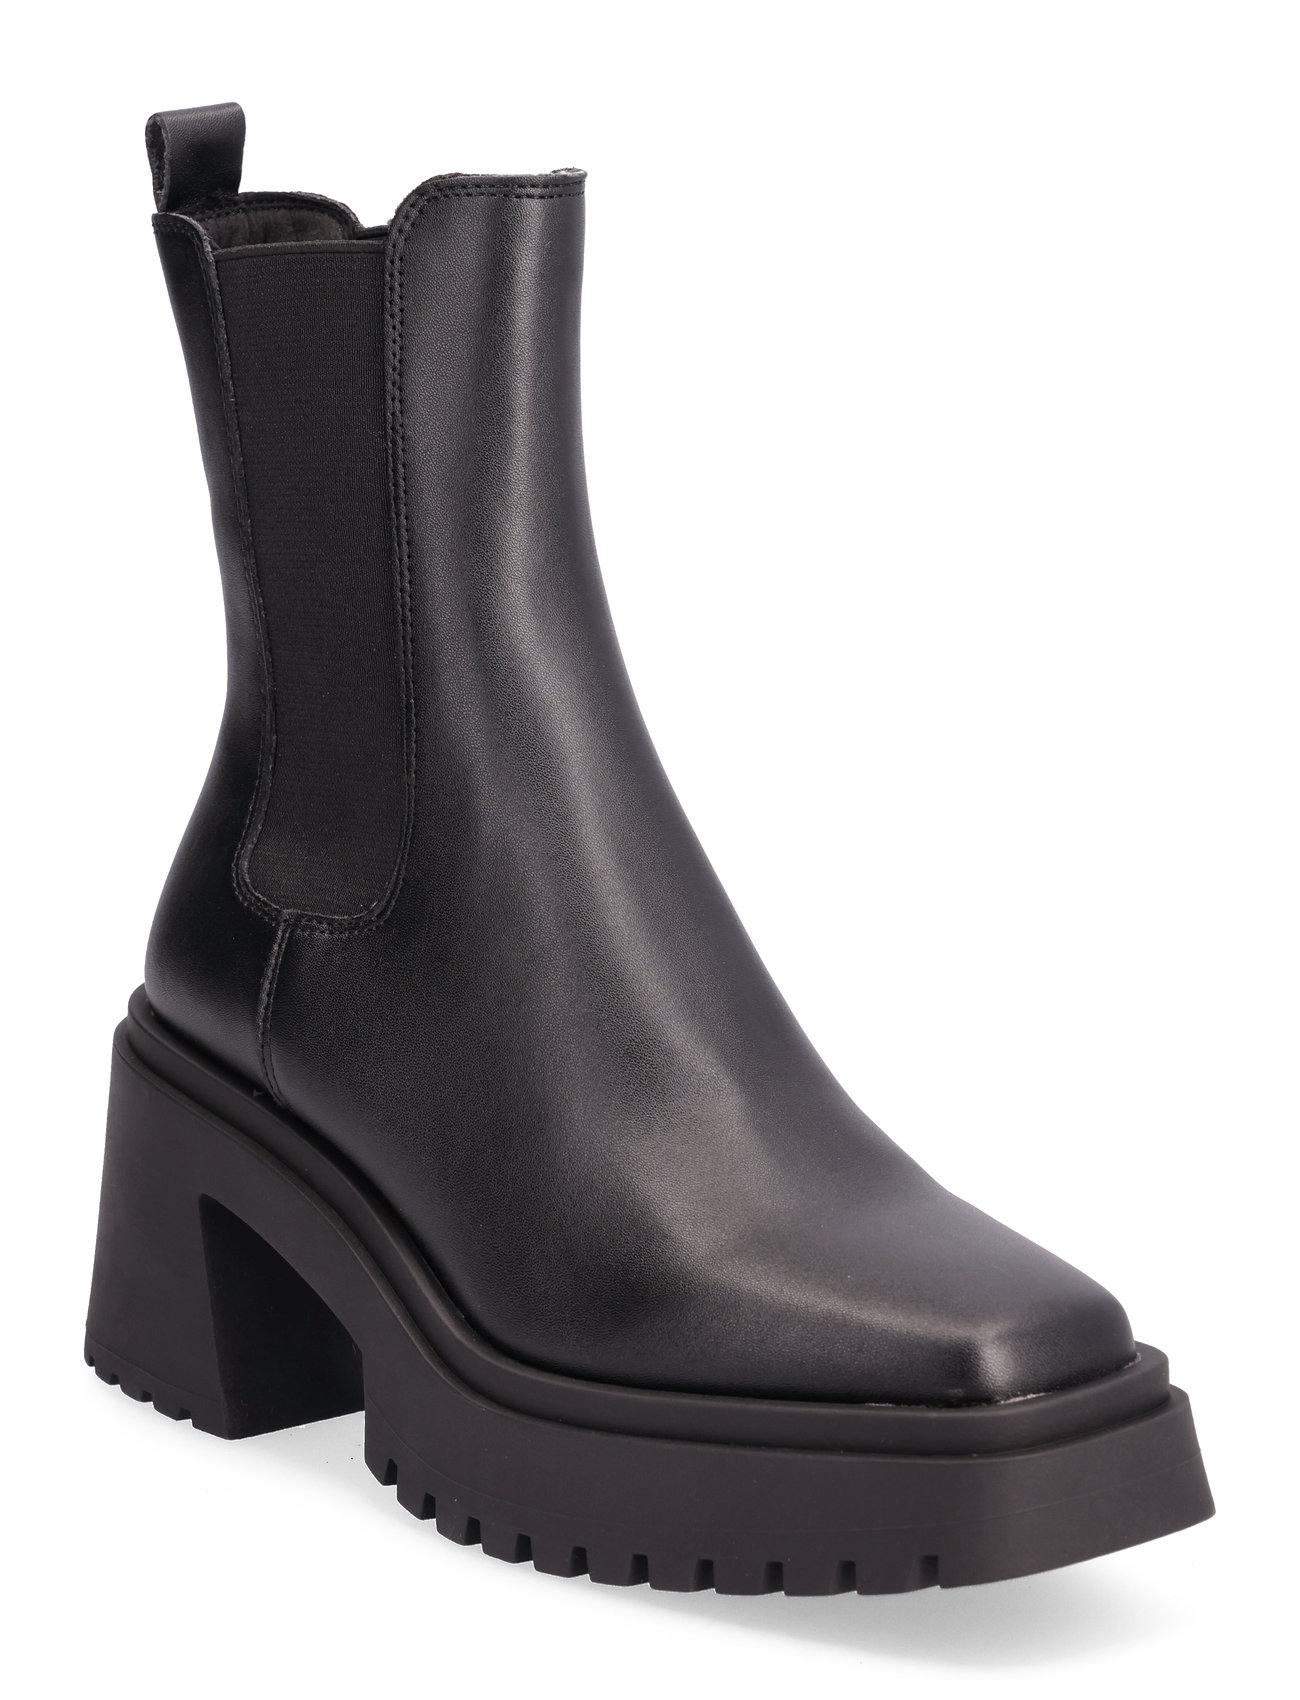 Steve Madden Parkway Bootie - Chelsea boots - Boozt.com